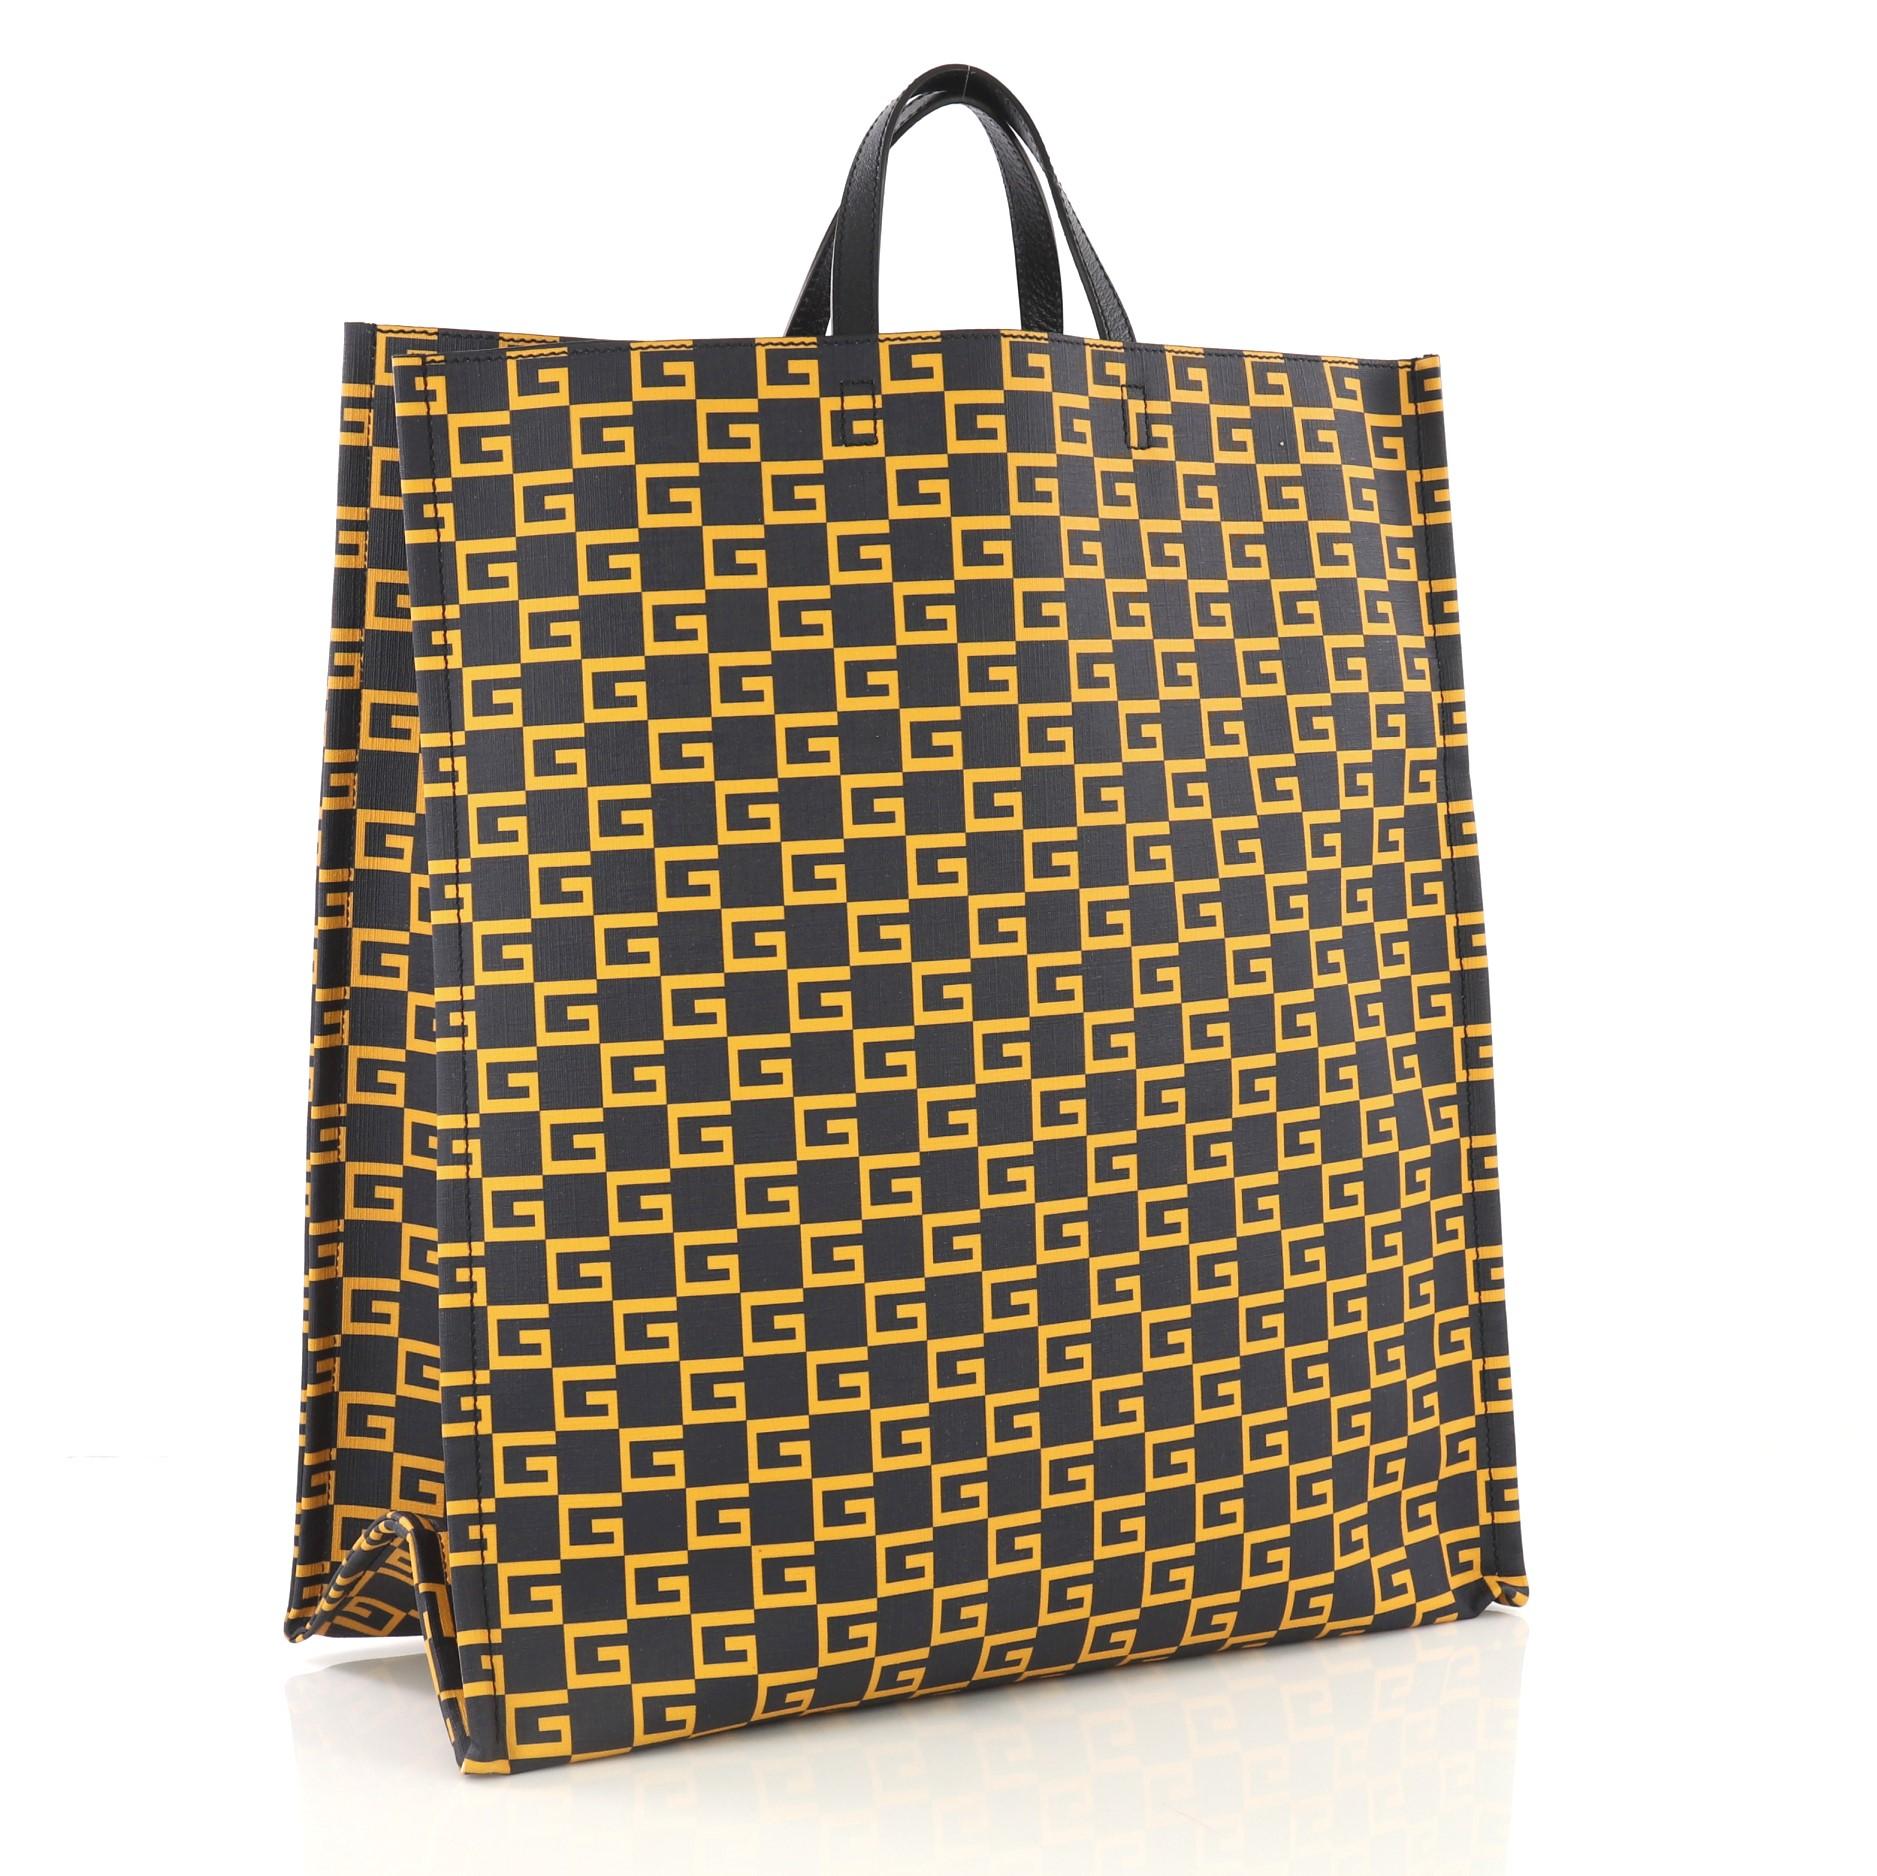 This Gucci Soft Open Tote Printed Coated Canvas Tall, crafted in navy and yellow printed coated canvas, features dual flat leather handles. It opens to a navy fabric interior. 

Estimated Retail Price: $980
Condition: Excellent. Minor wear on base